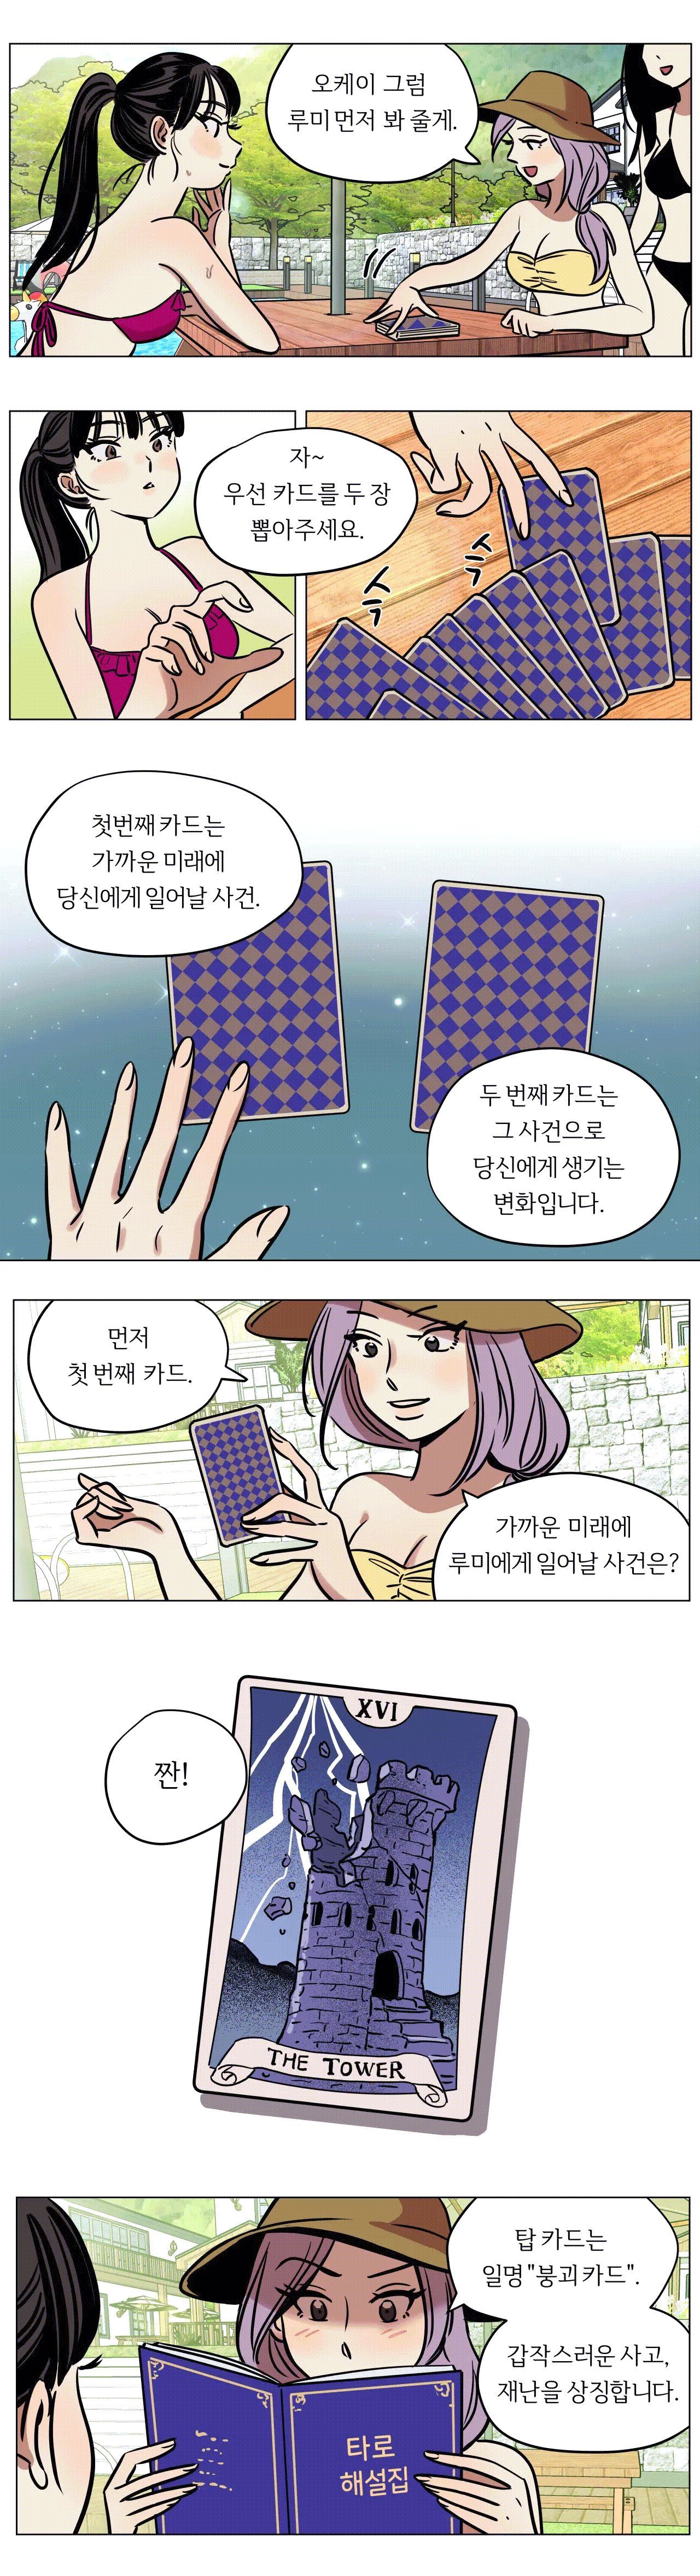 Snowman Raw - Chapter 7 Page 10